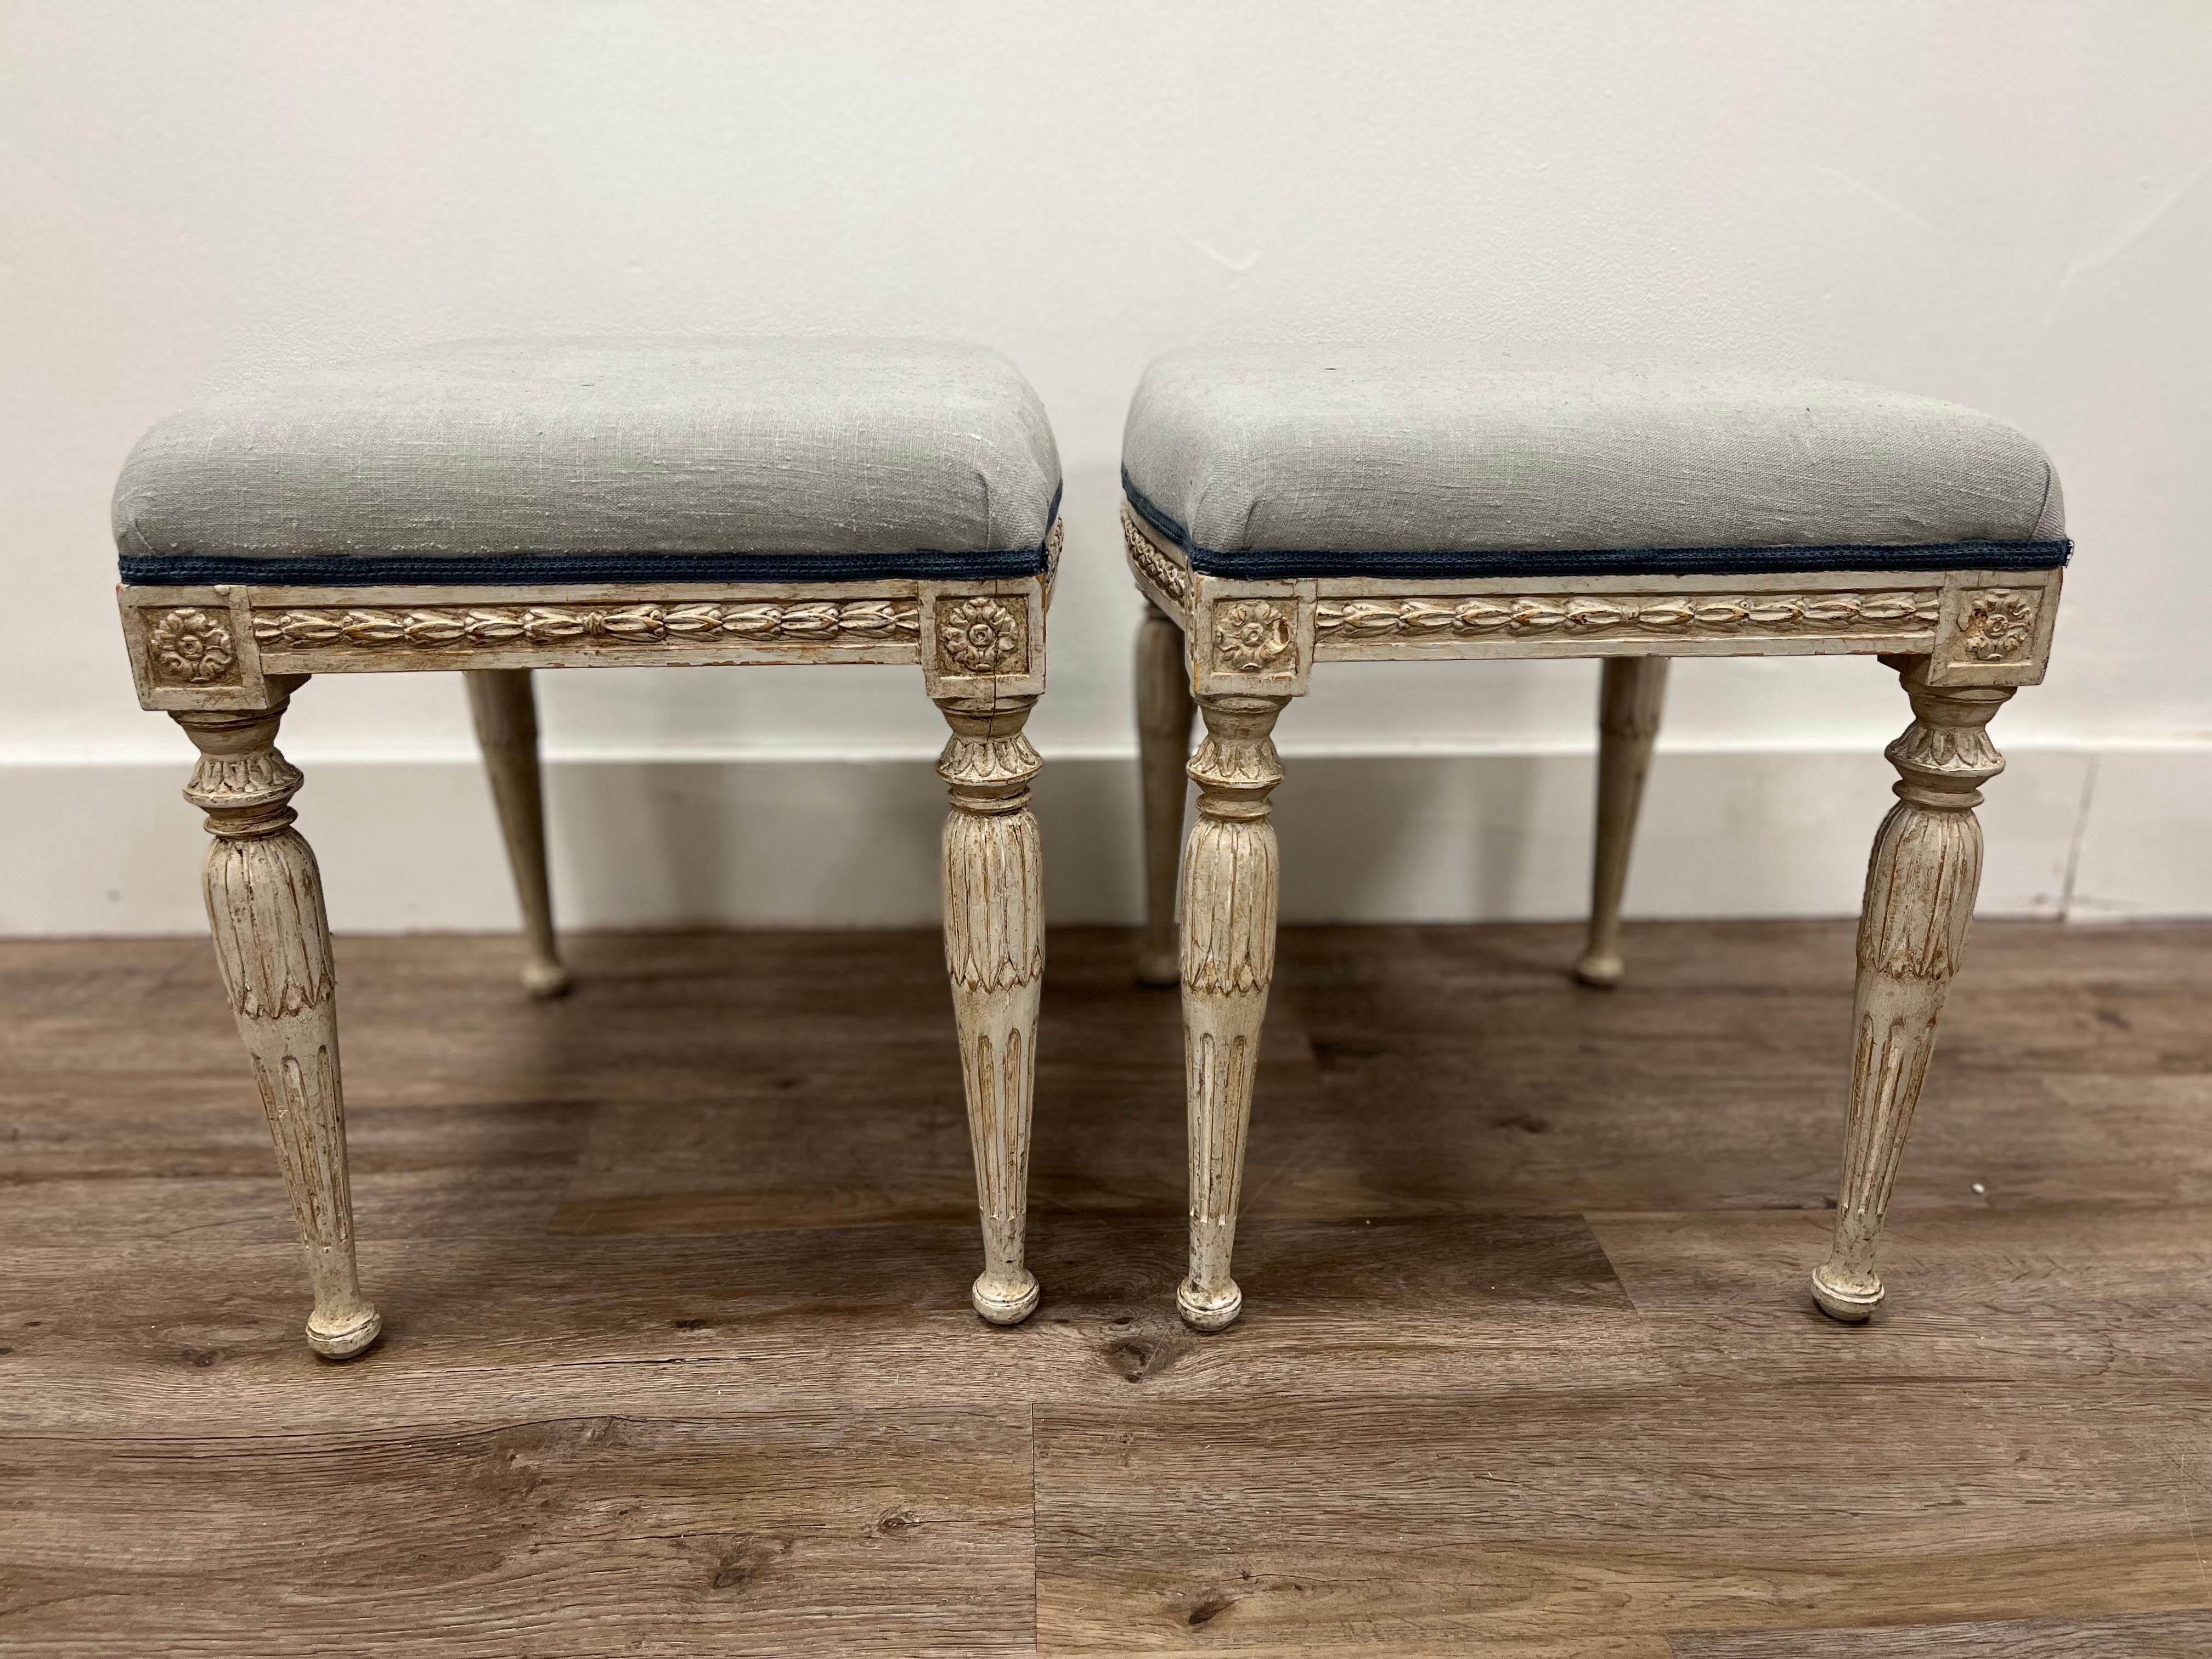 A beautiful pair of Late Gustavian footstools. In the style of Ephraim Ståhl. Rectangular frame with slight bowfront and back. Featuring a decorative hand-carved scroll with fleurons on the corners. Turned legs have leaf cut over-collaring and